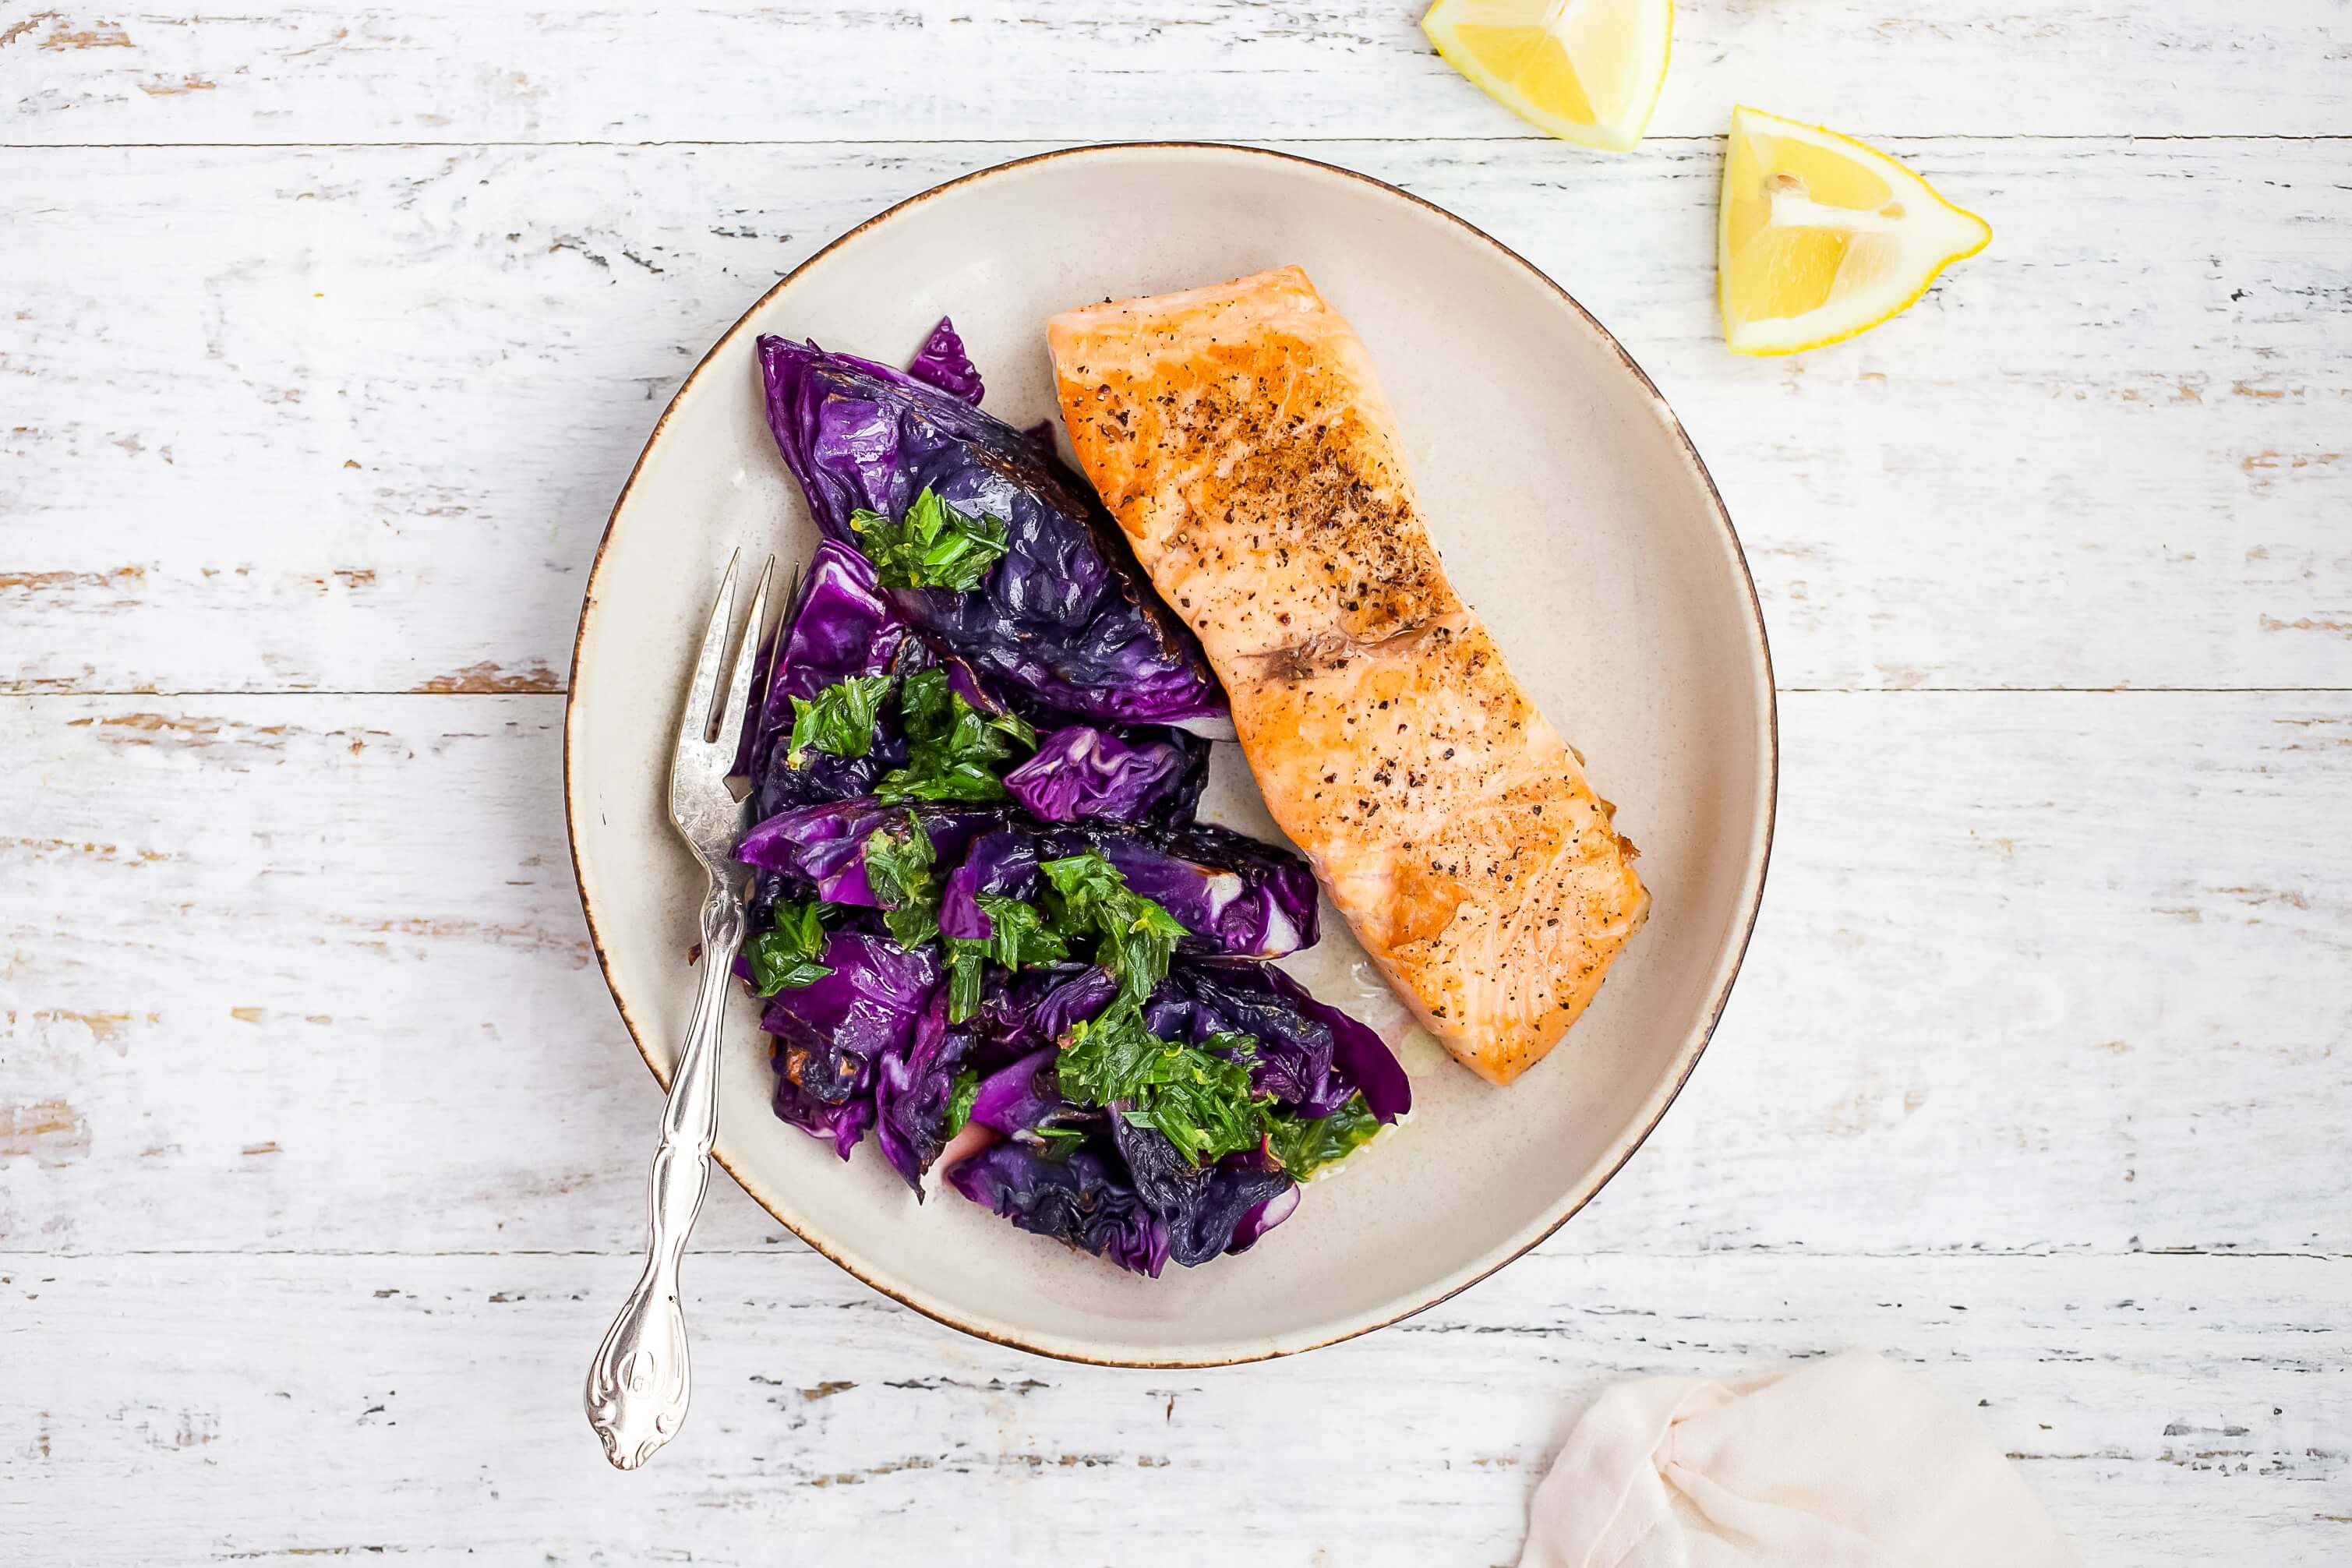 20 Low Oxalate Meals Your Clients Will Love: One Pan Lemon & Chive Salmon